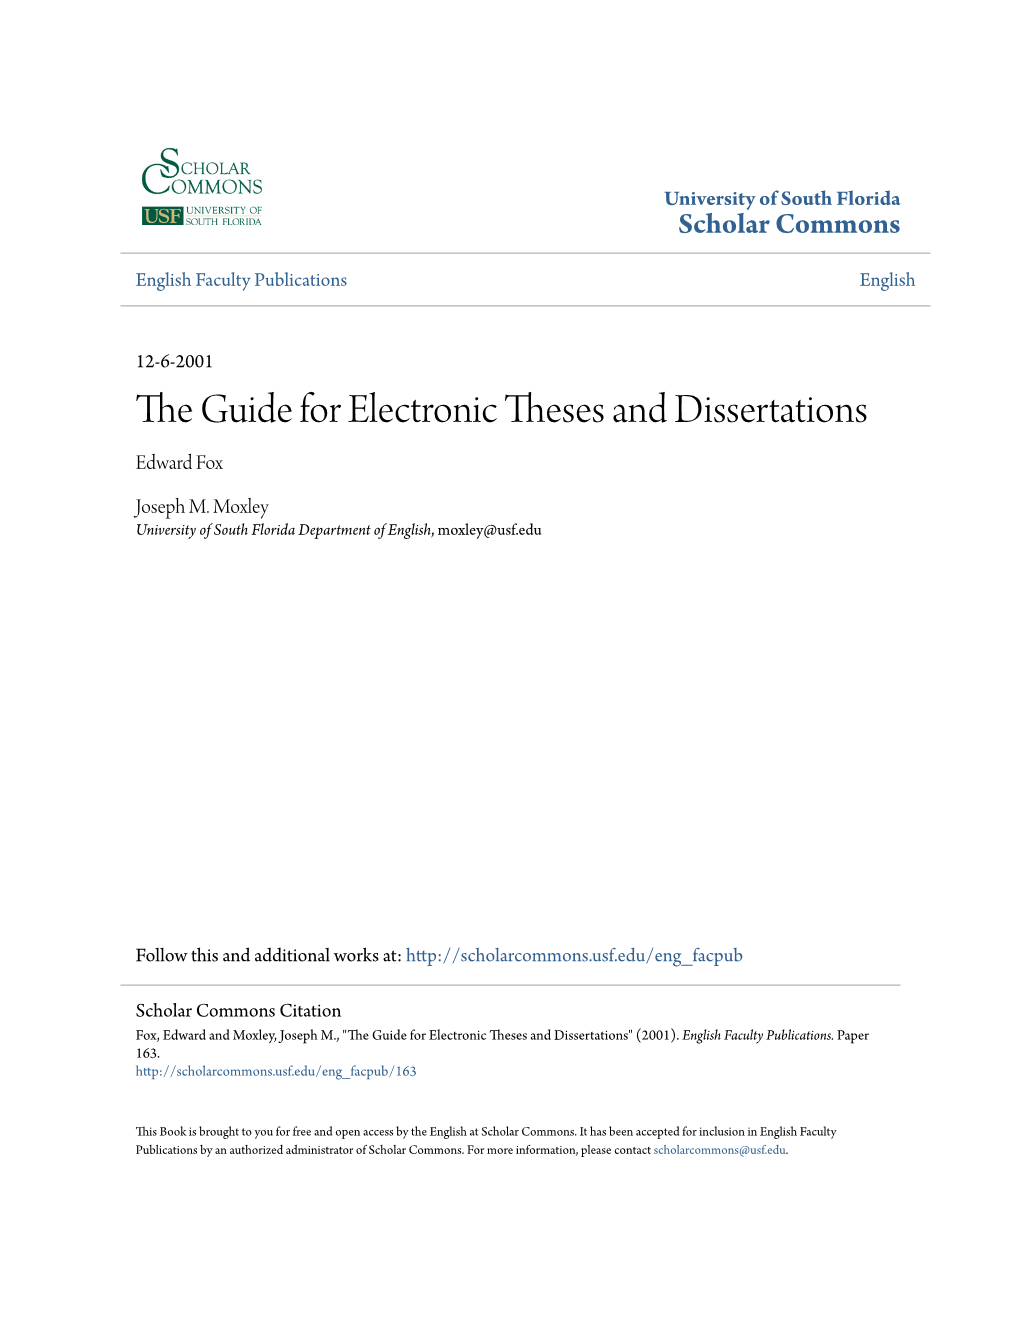 The Guide for Electronic Theses and Dissertations